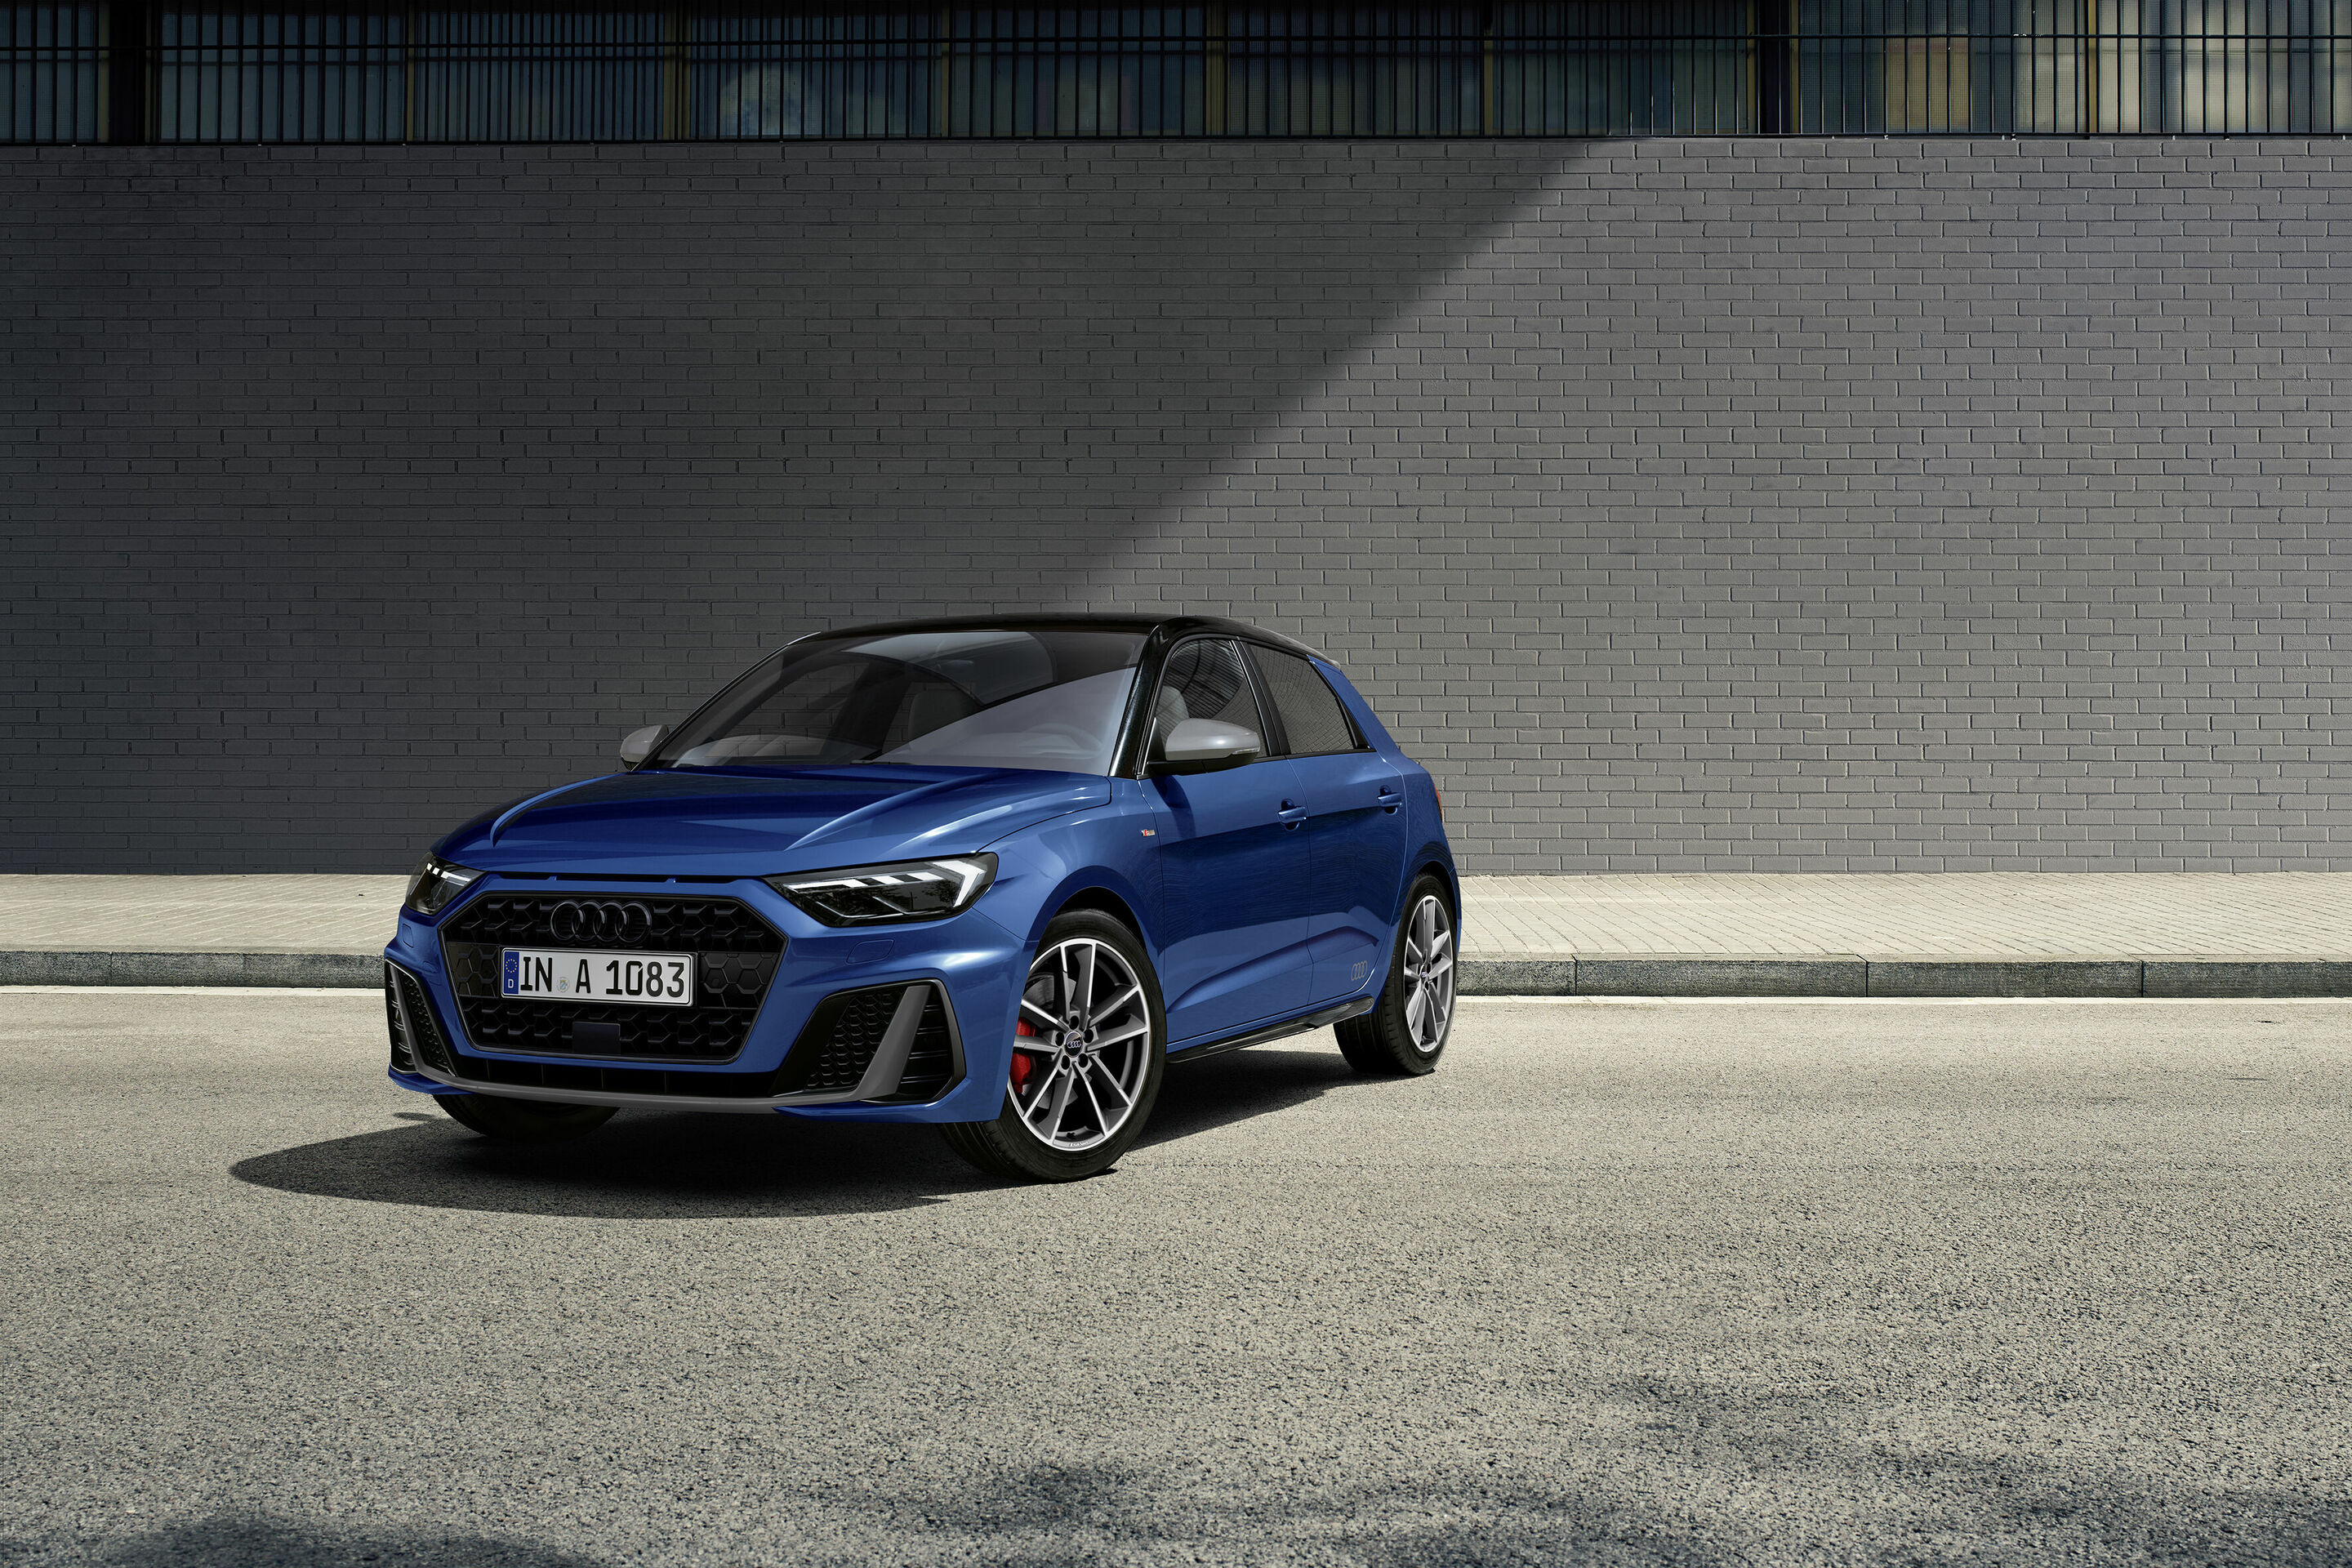 Refined details: Audi gives the A1, A4, A5, Q7 and Q8 a sporty new look for the new model year